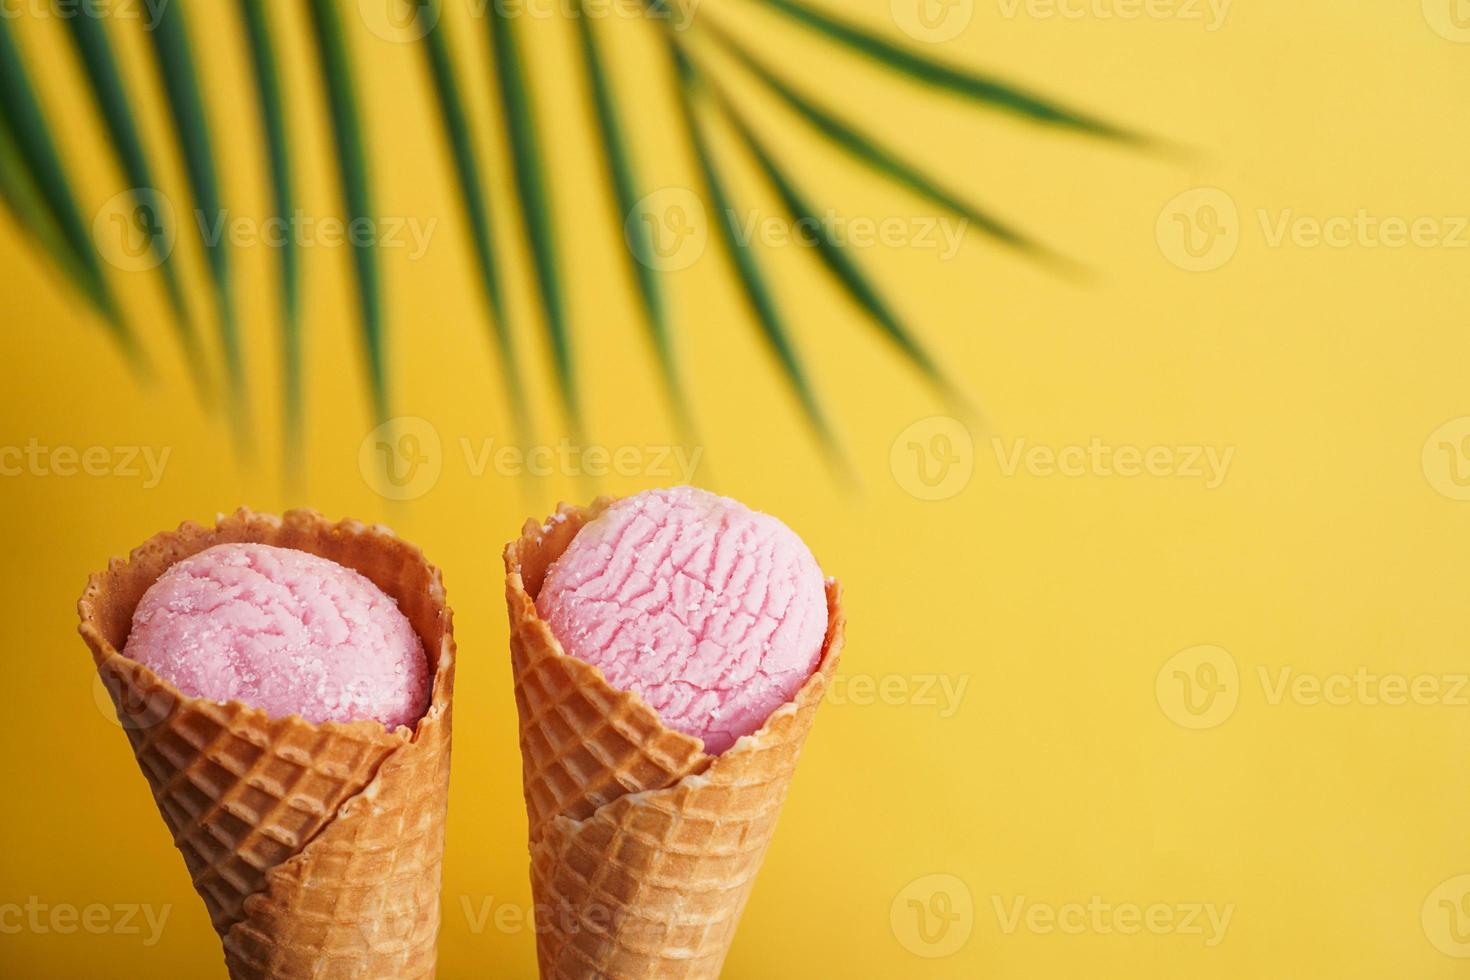 Two strawberry ice creams in a cone on a yellow photo